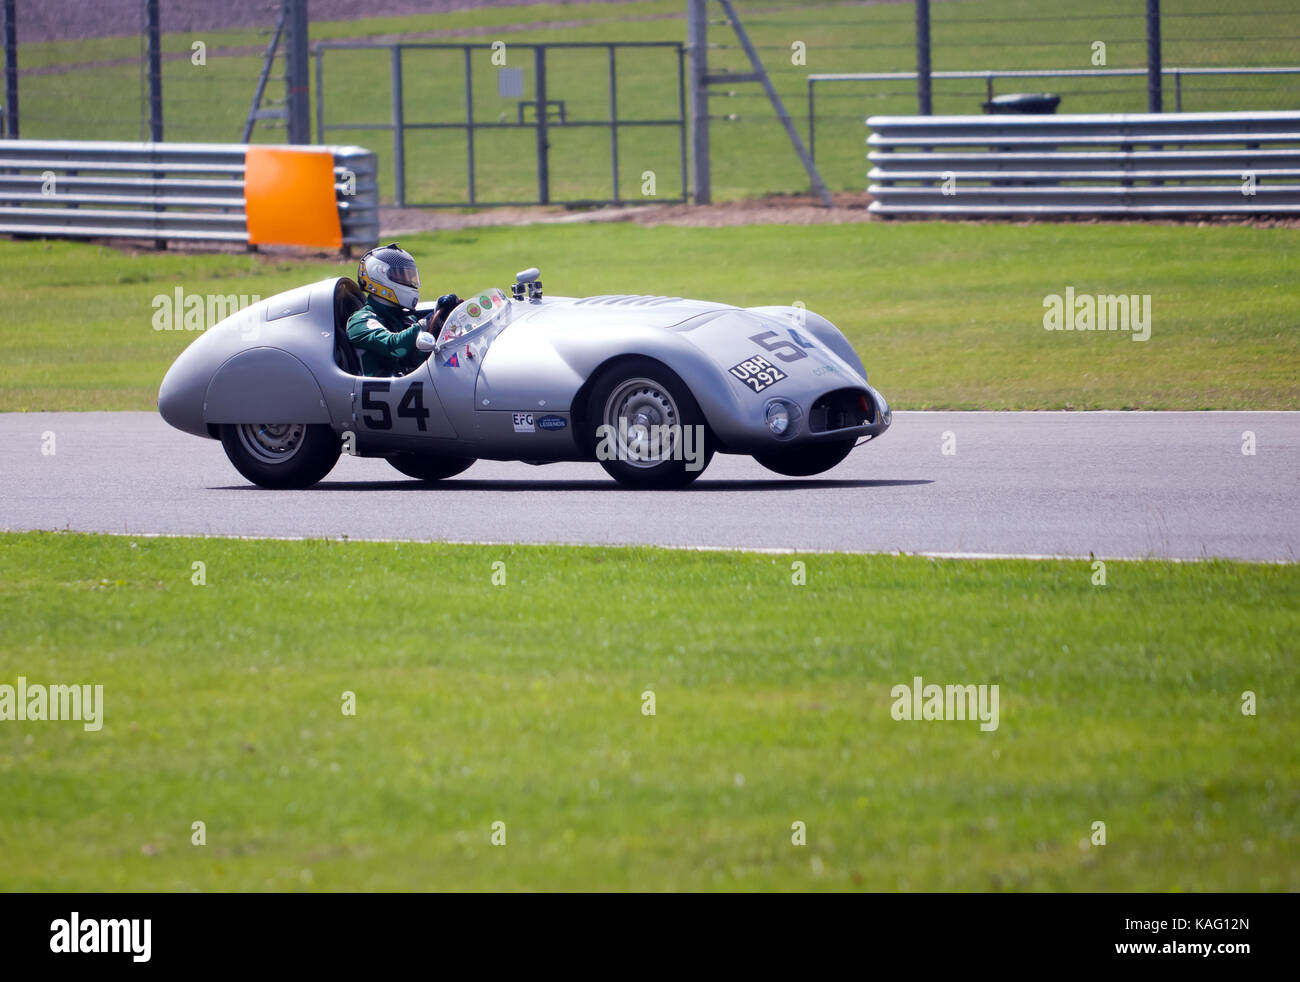 Chris Ward driving JD Classics 1954 Silver Cooper Jaguar, during  the Woodcote Trophy Race at the 2017 Silverstone Classic Stock Photo